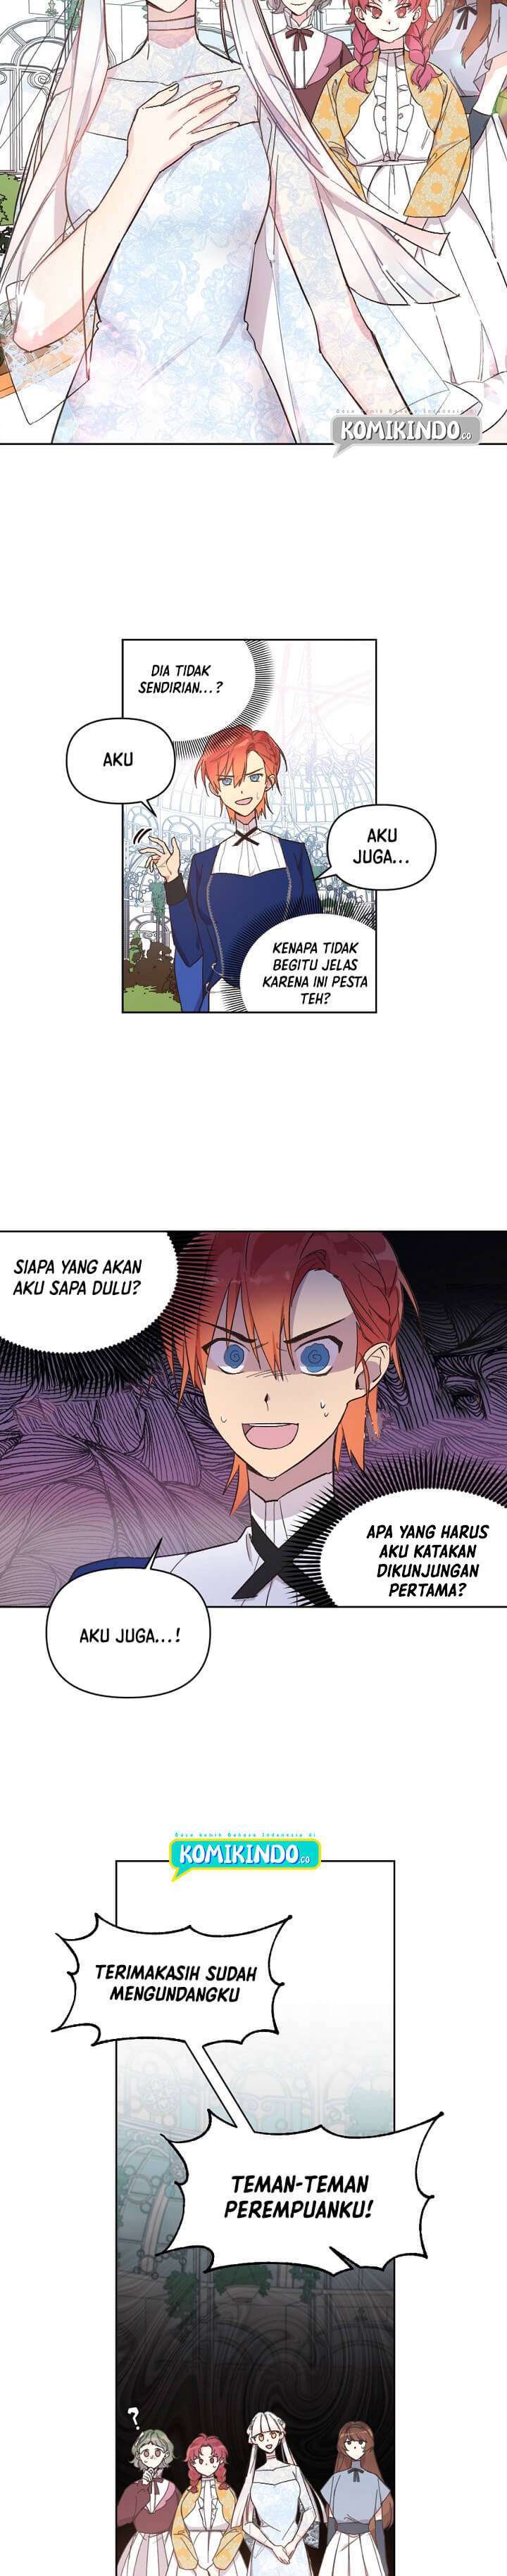 Asirhart Kingdom Aide Chapter 6